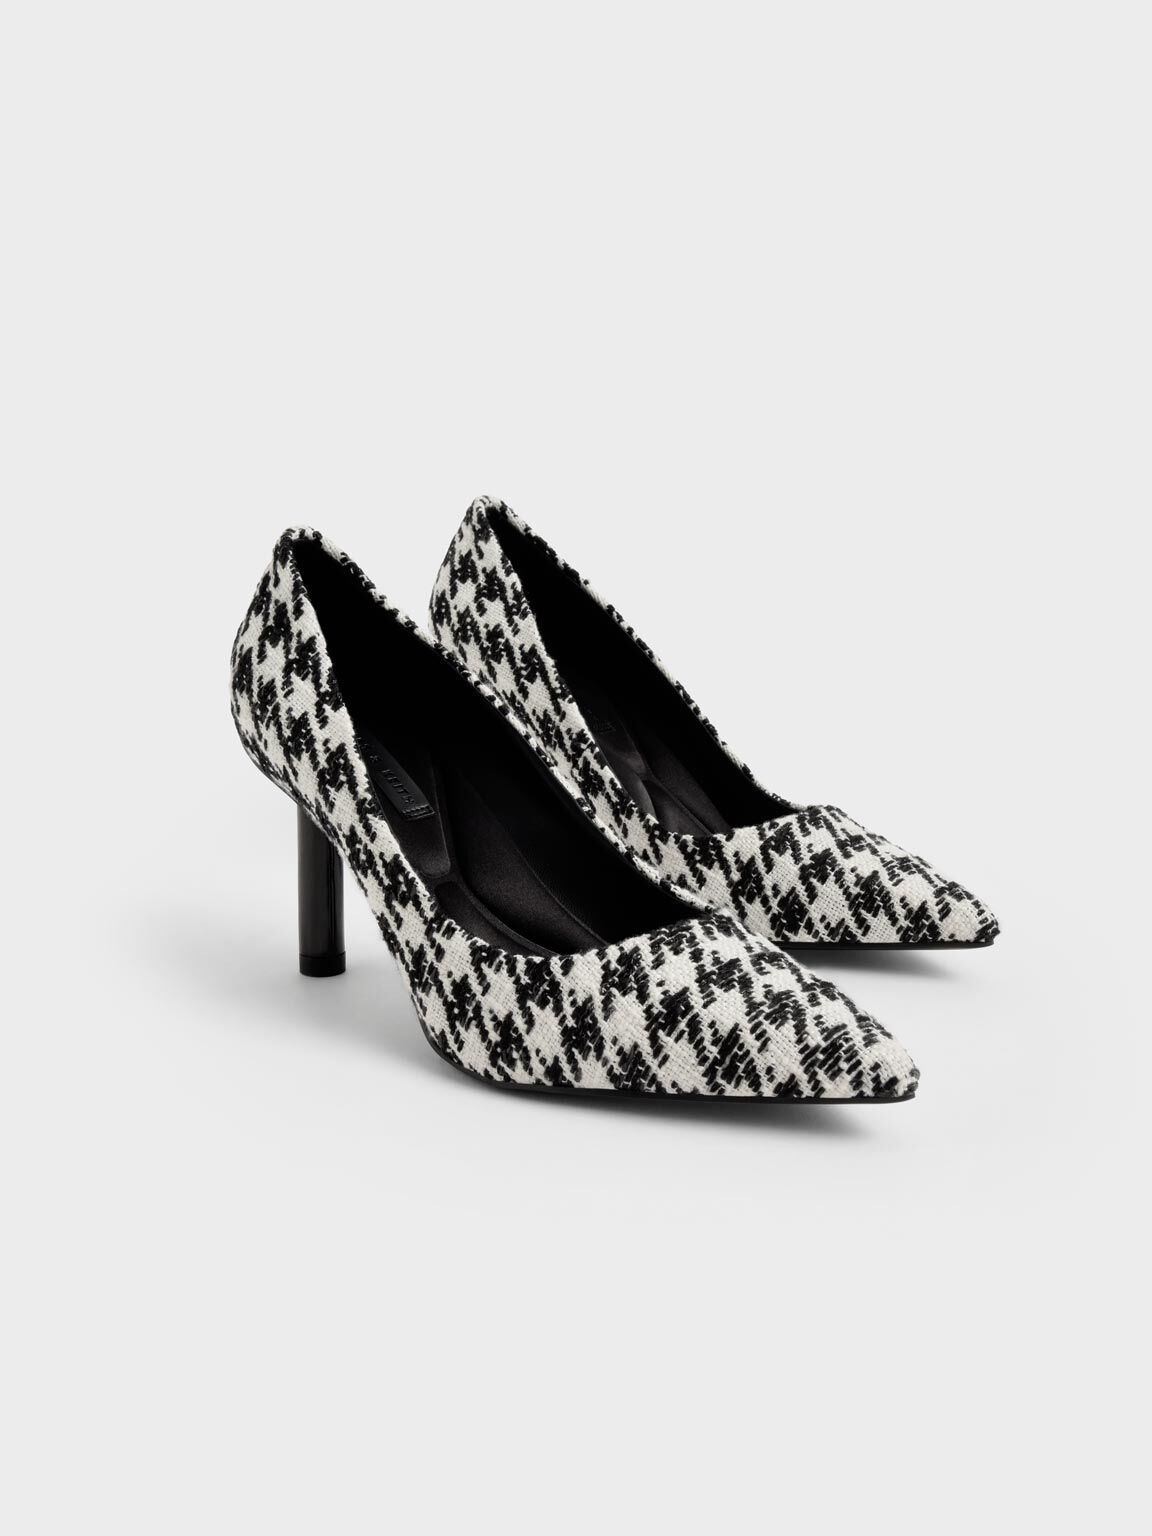 Houndstooth Print Cylindrical Heel Pumps - Multi